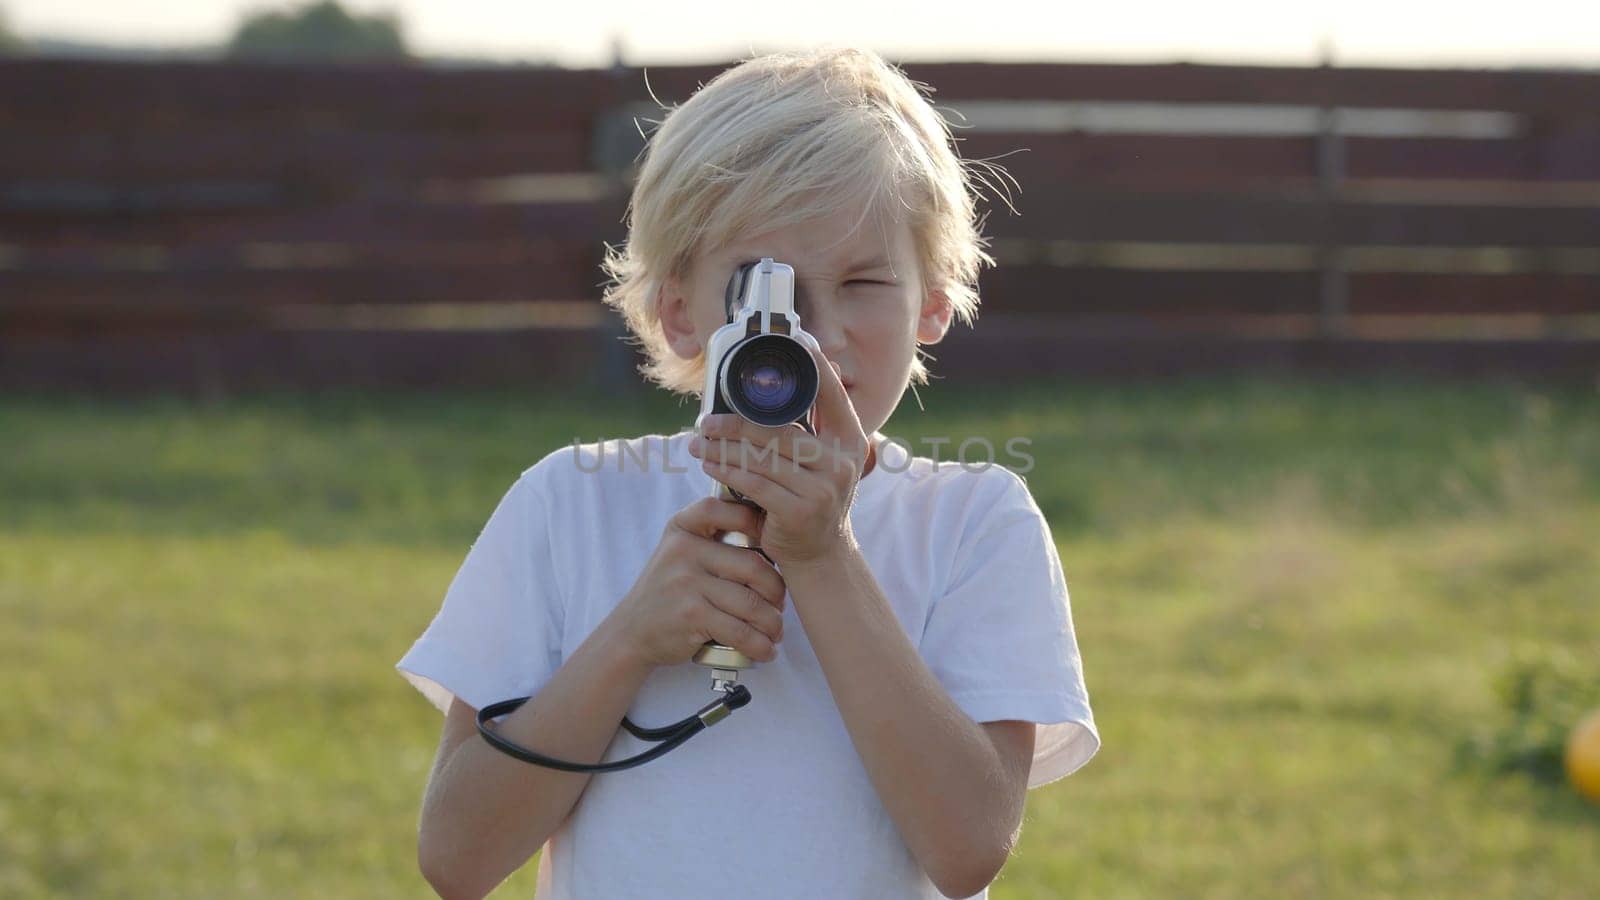 Little boy shoots a video of an old retro camera